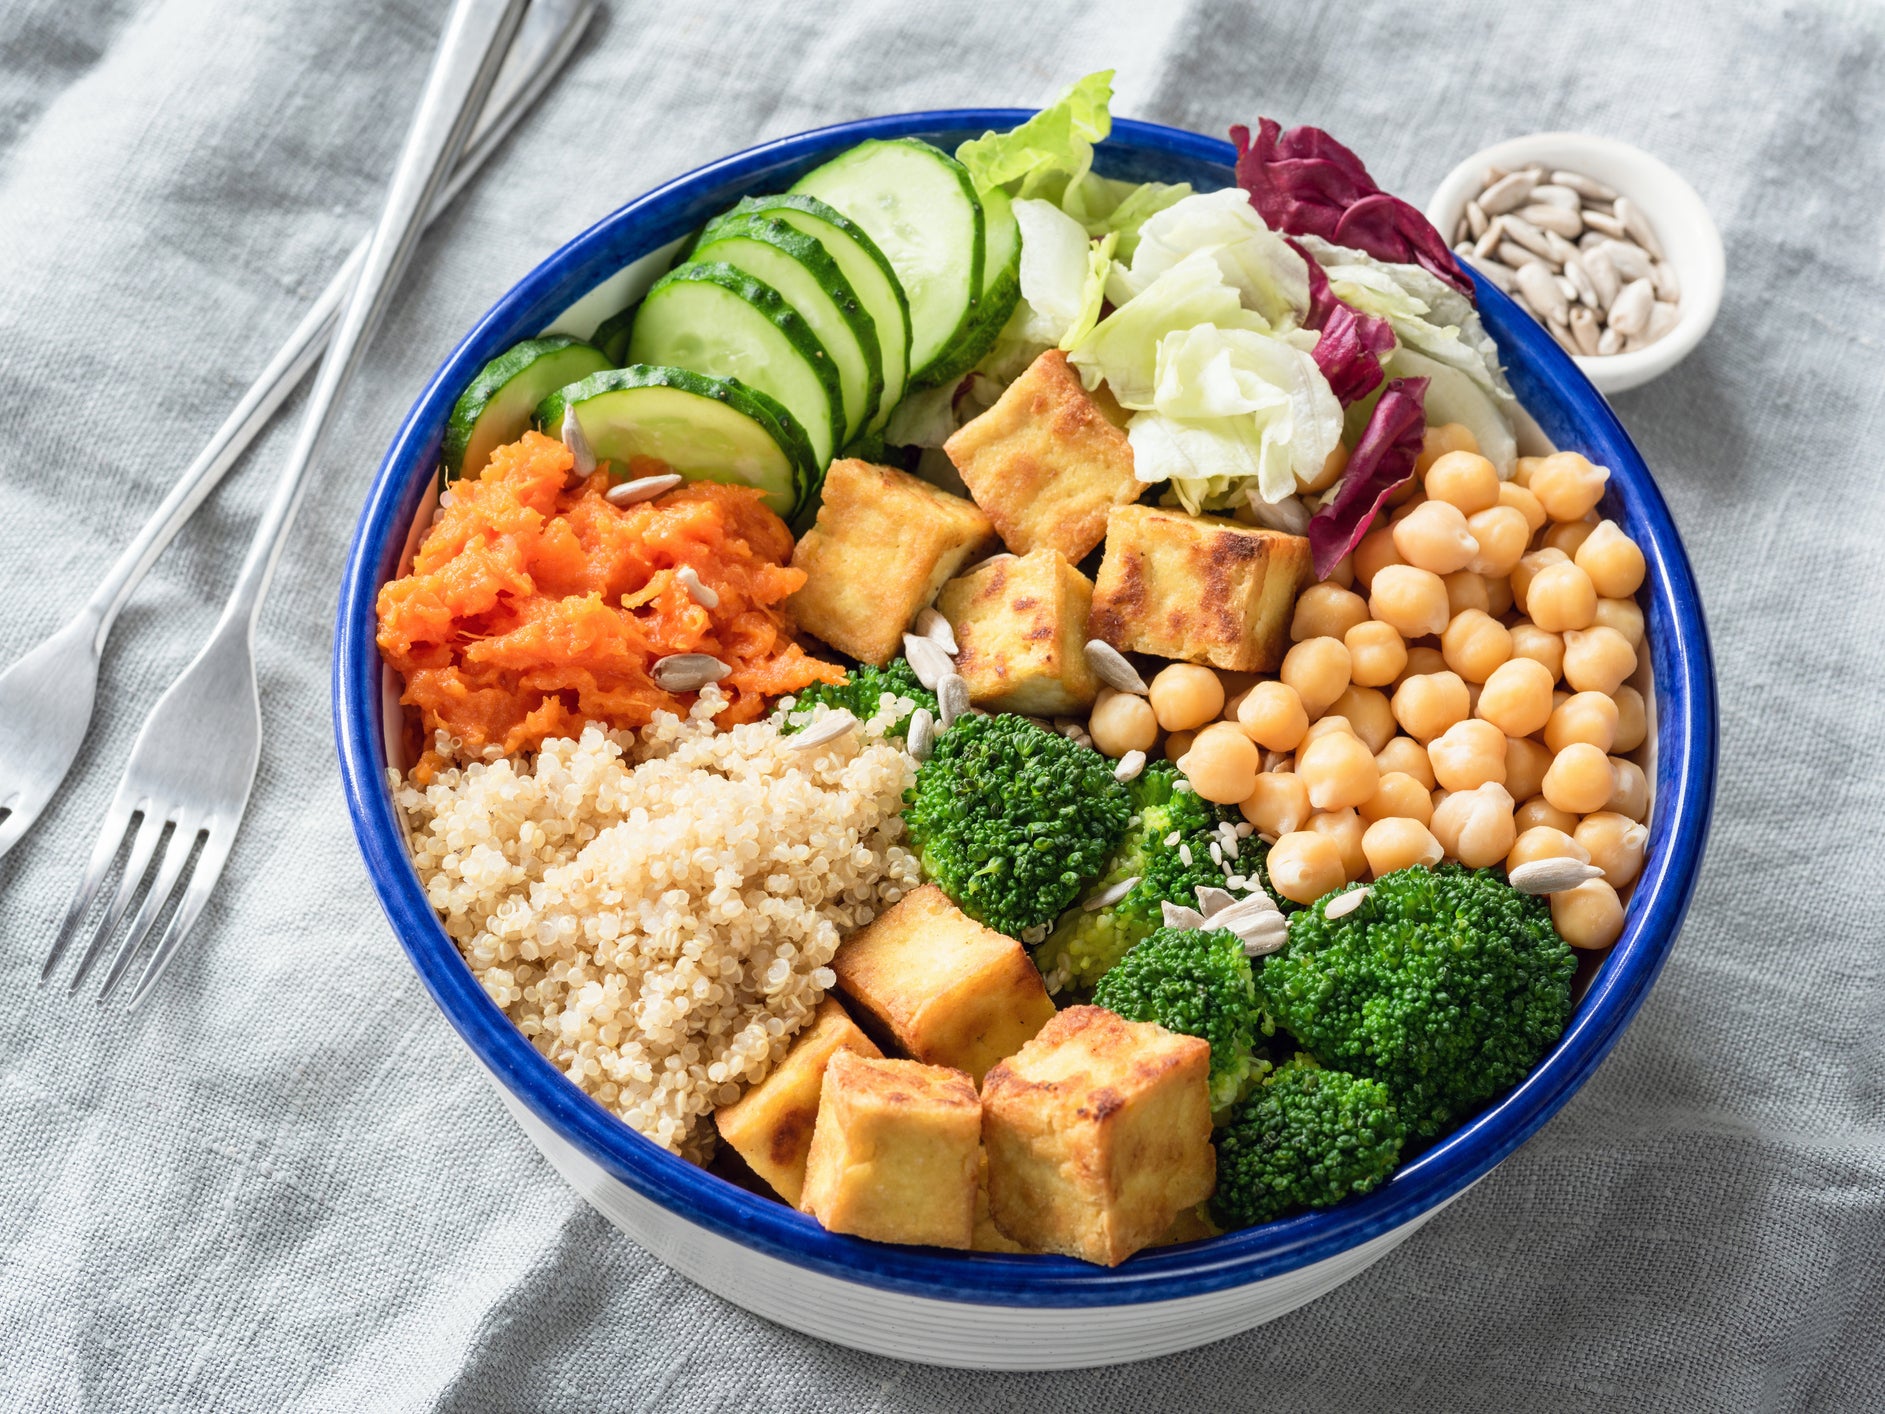 High Protein Vegetarian foods that substitute for a Non-Veg Meal